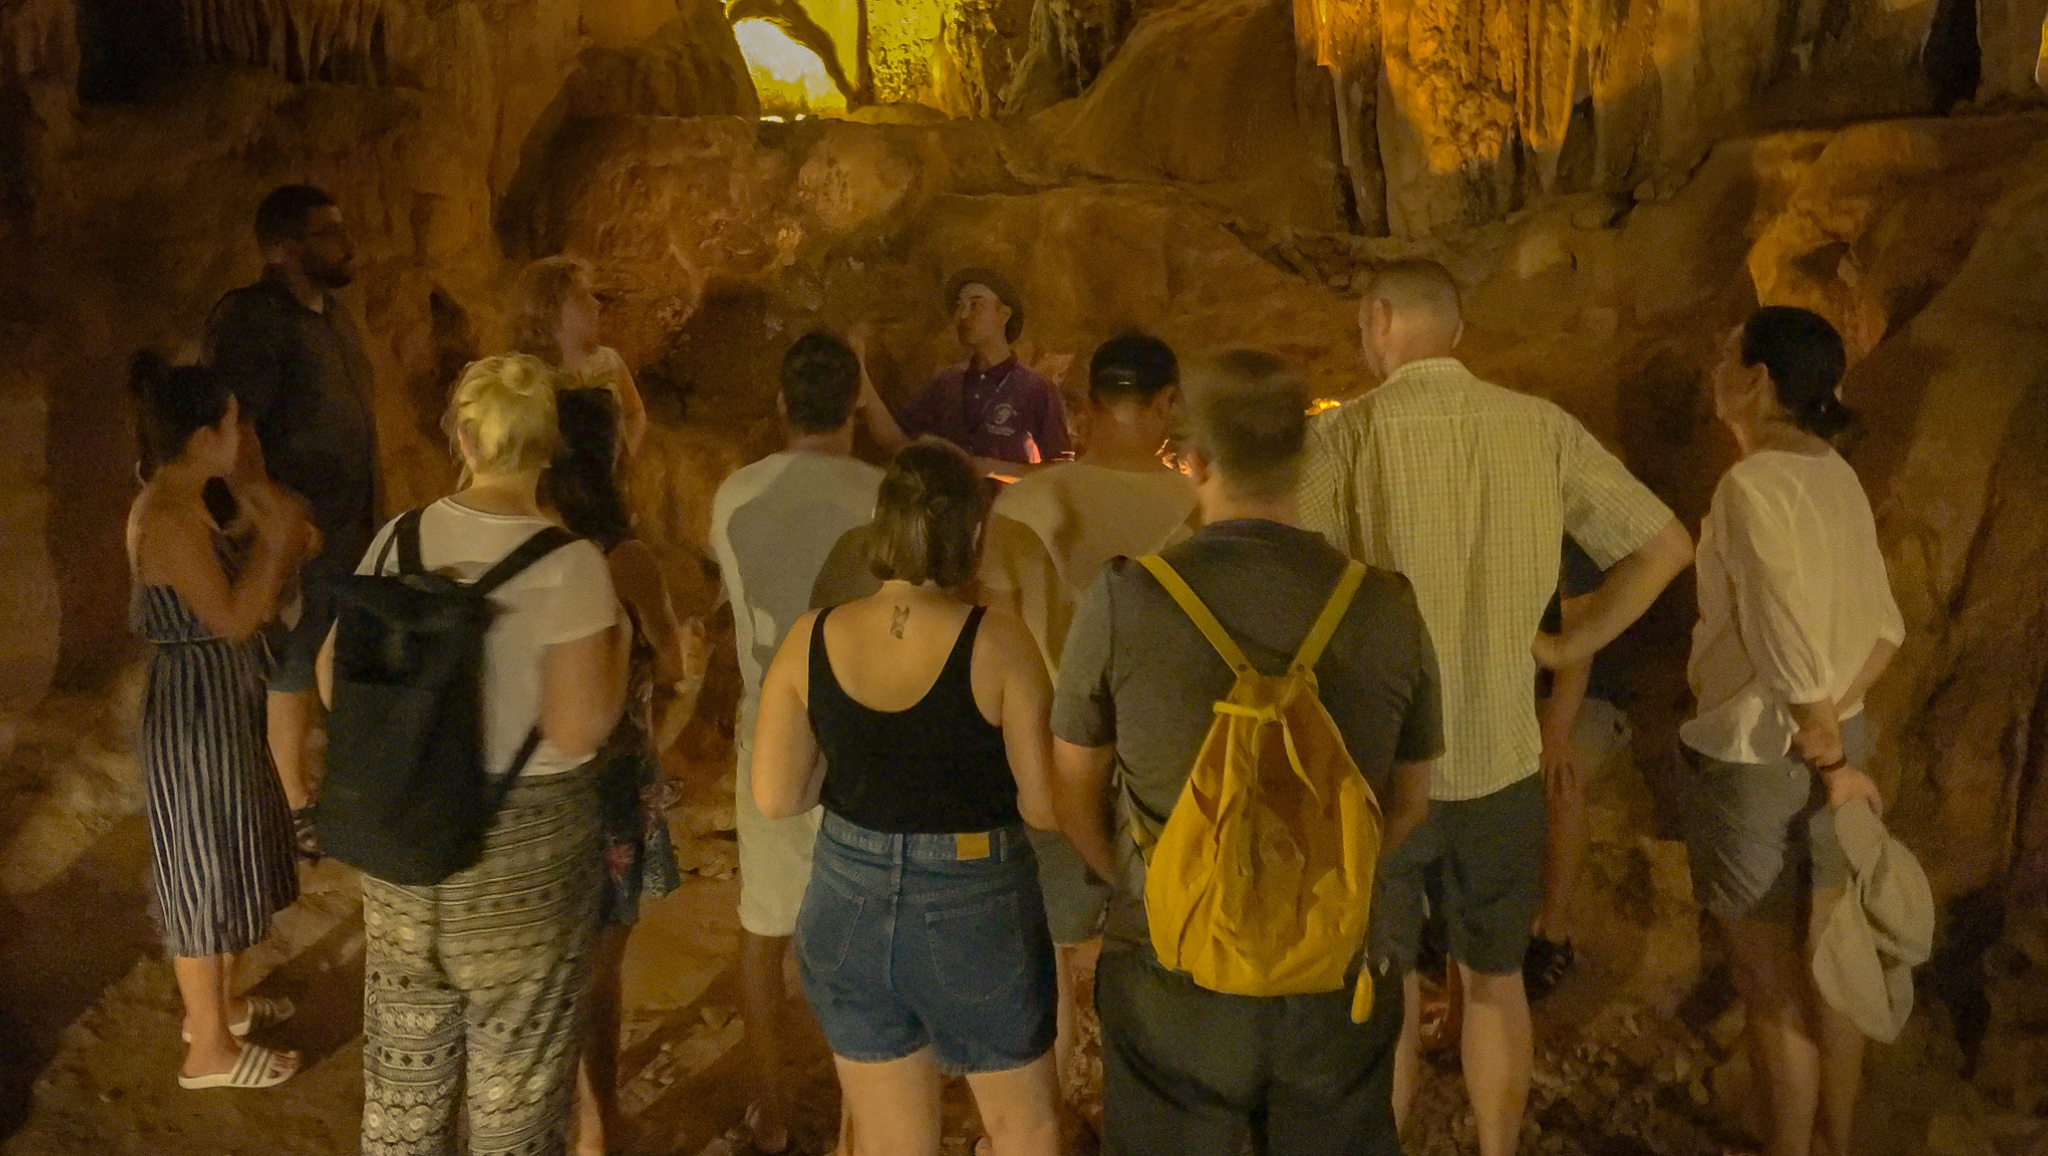 Visit To The Remarkable Sung Sot Cave